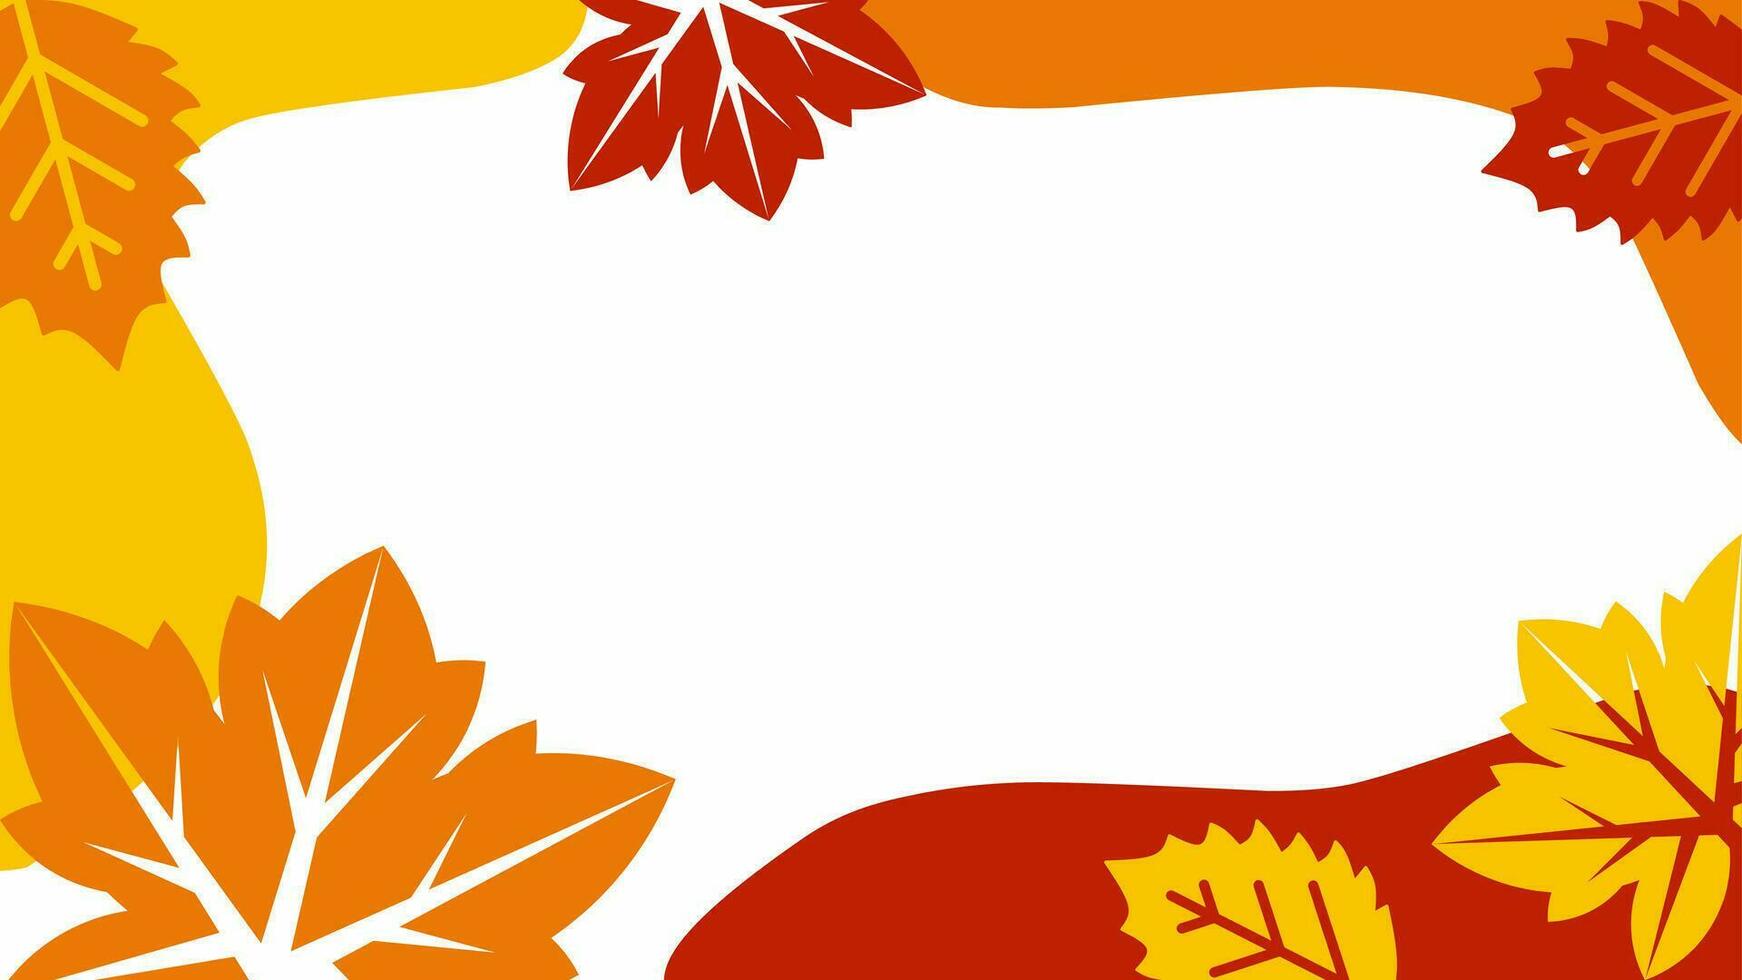 Autumn background vector illustration. Autumn leaves frame background. Fall season design for background, template, landing page or decoration. Fall season frame with maple leaf and autumnal  leaves